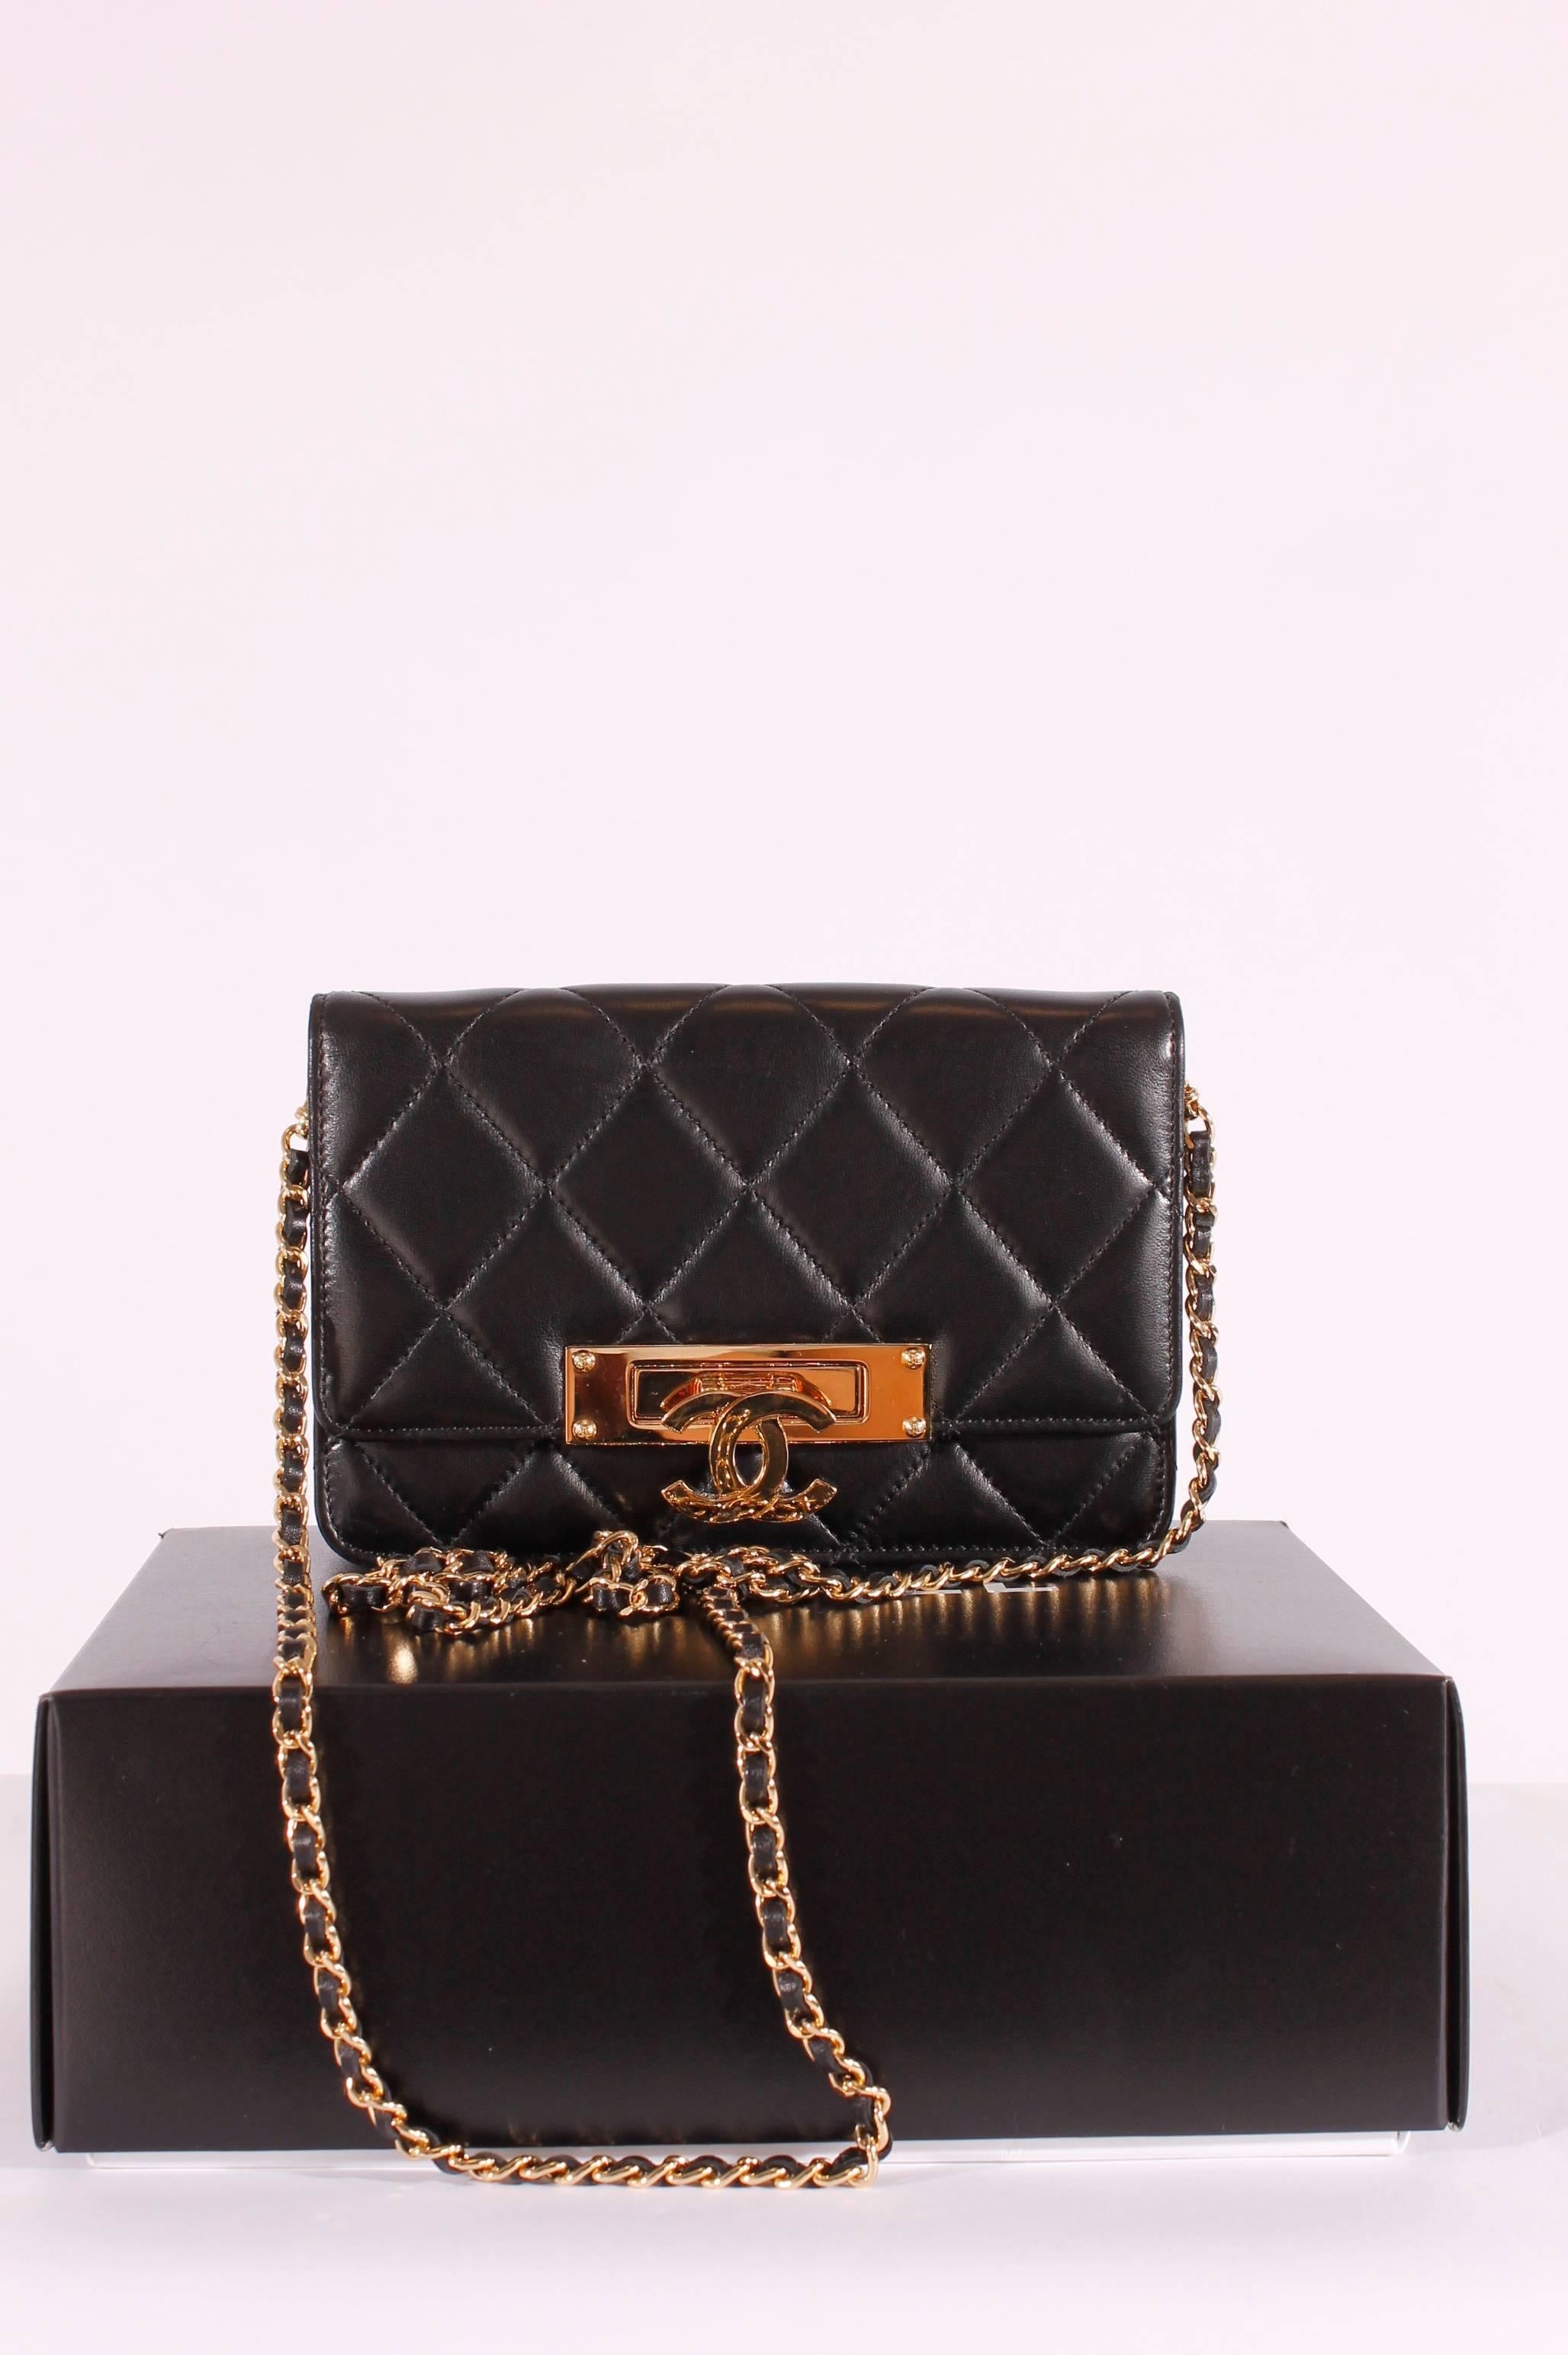 This little beauty is not a wallet-on-a-chain, but very comparable to the WOC collection. This is the Chanel Golden Class Double CC Bag from the Cruise Collection of 2014, very very nice!!

Made of soft black quilted lambskin leather with golden